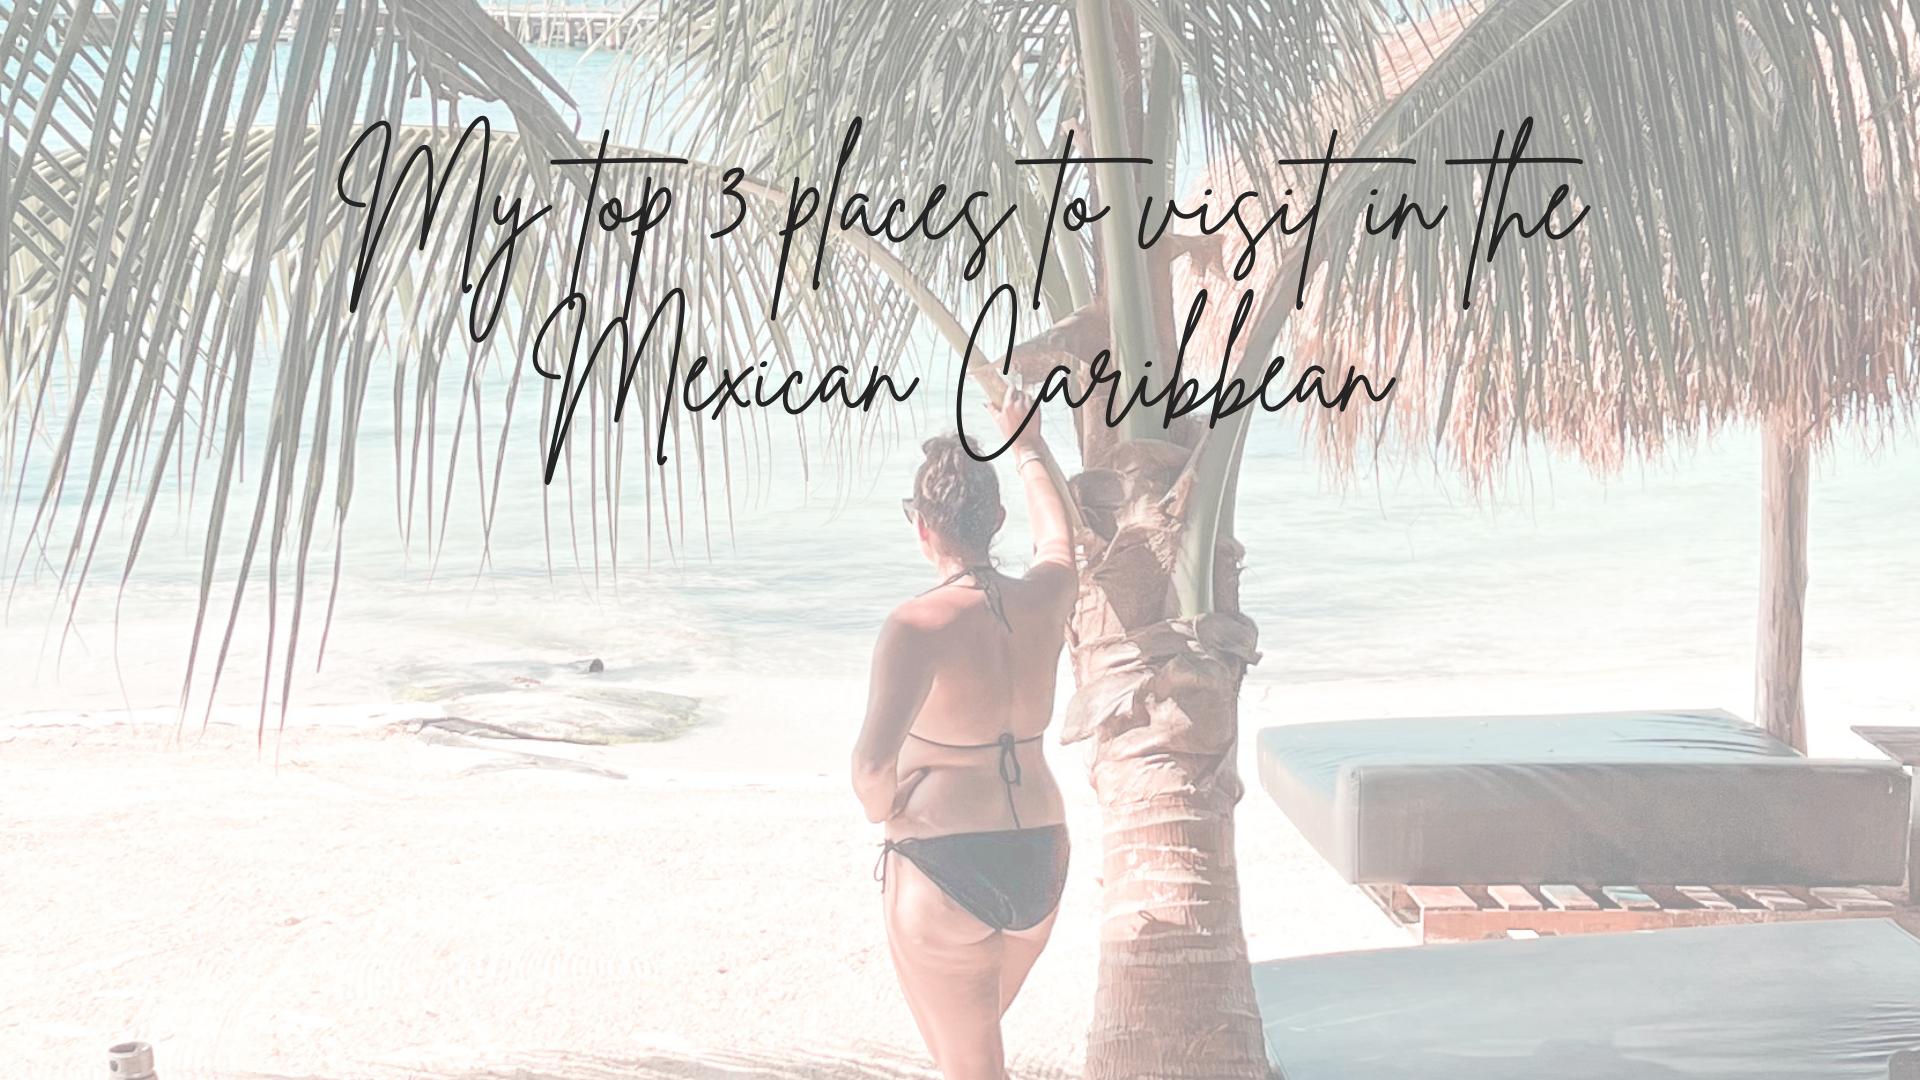 Places to Visit in the Mexican Caribbean